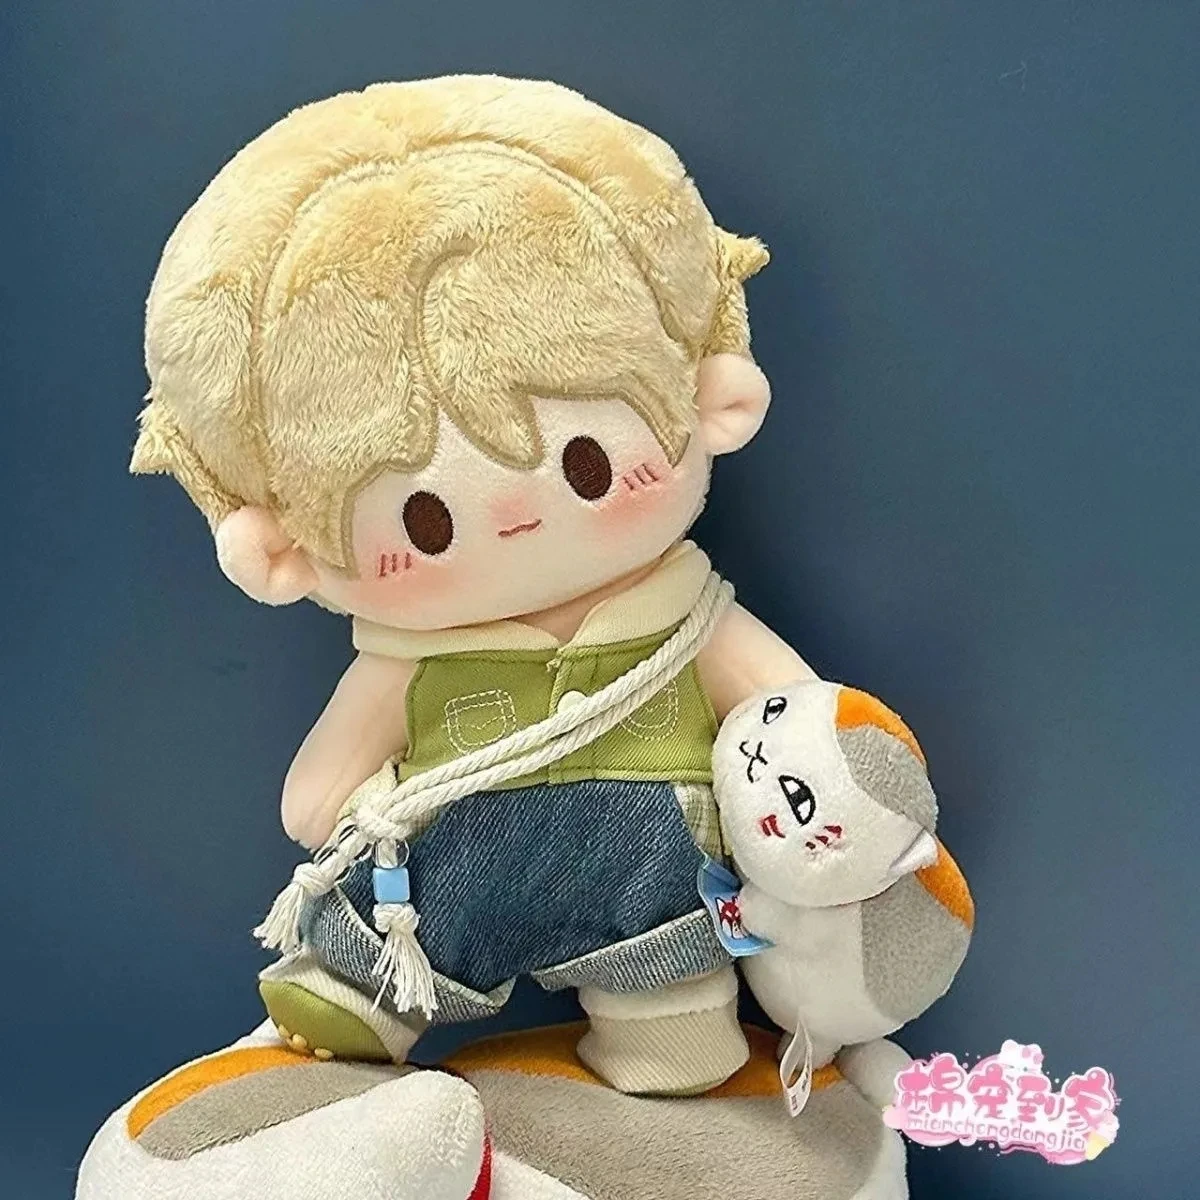 Anime Natsume's Book of Friends Natsume Takashi 20cm Plush Dolls Toy Nude Doll Plushie Cosplay a5837 Kids Gift outer space coloring book for kids featuring planets astronauts aliens rocketships and much more 30 page